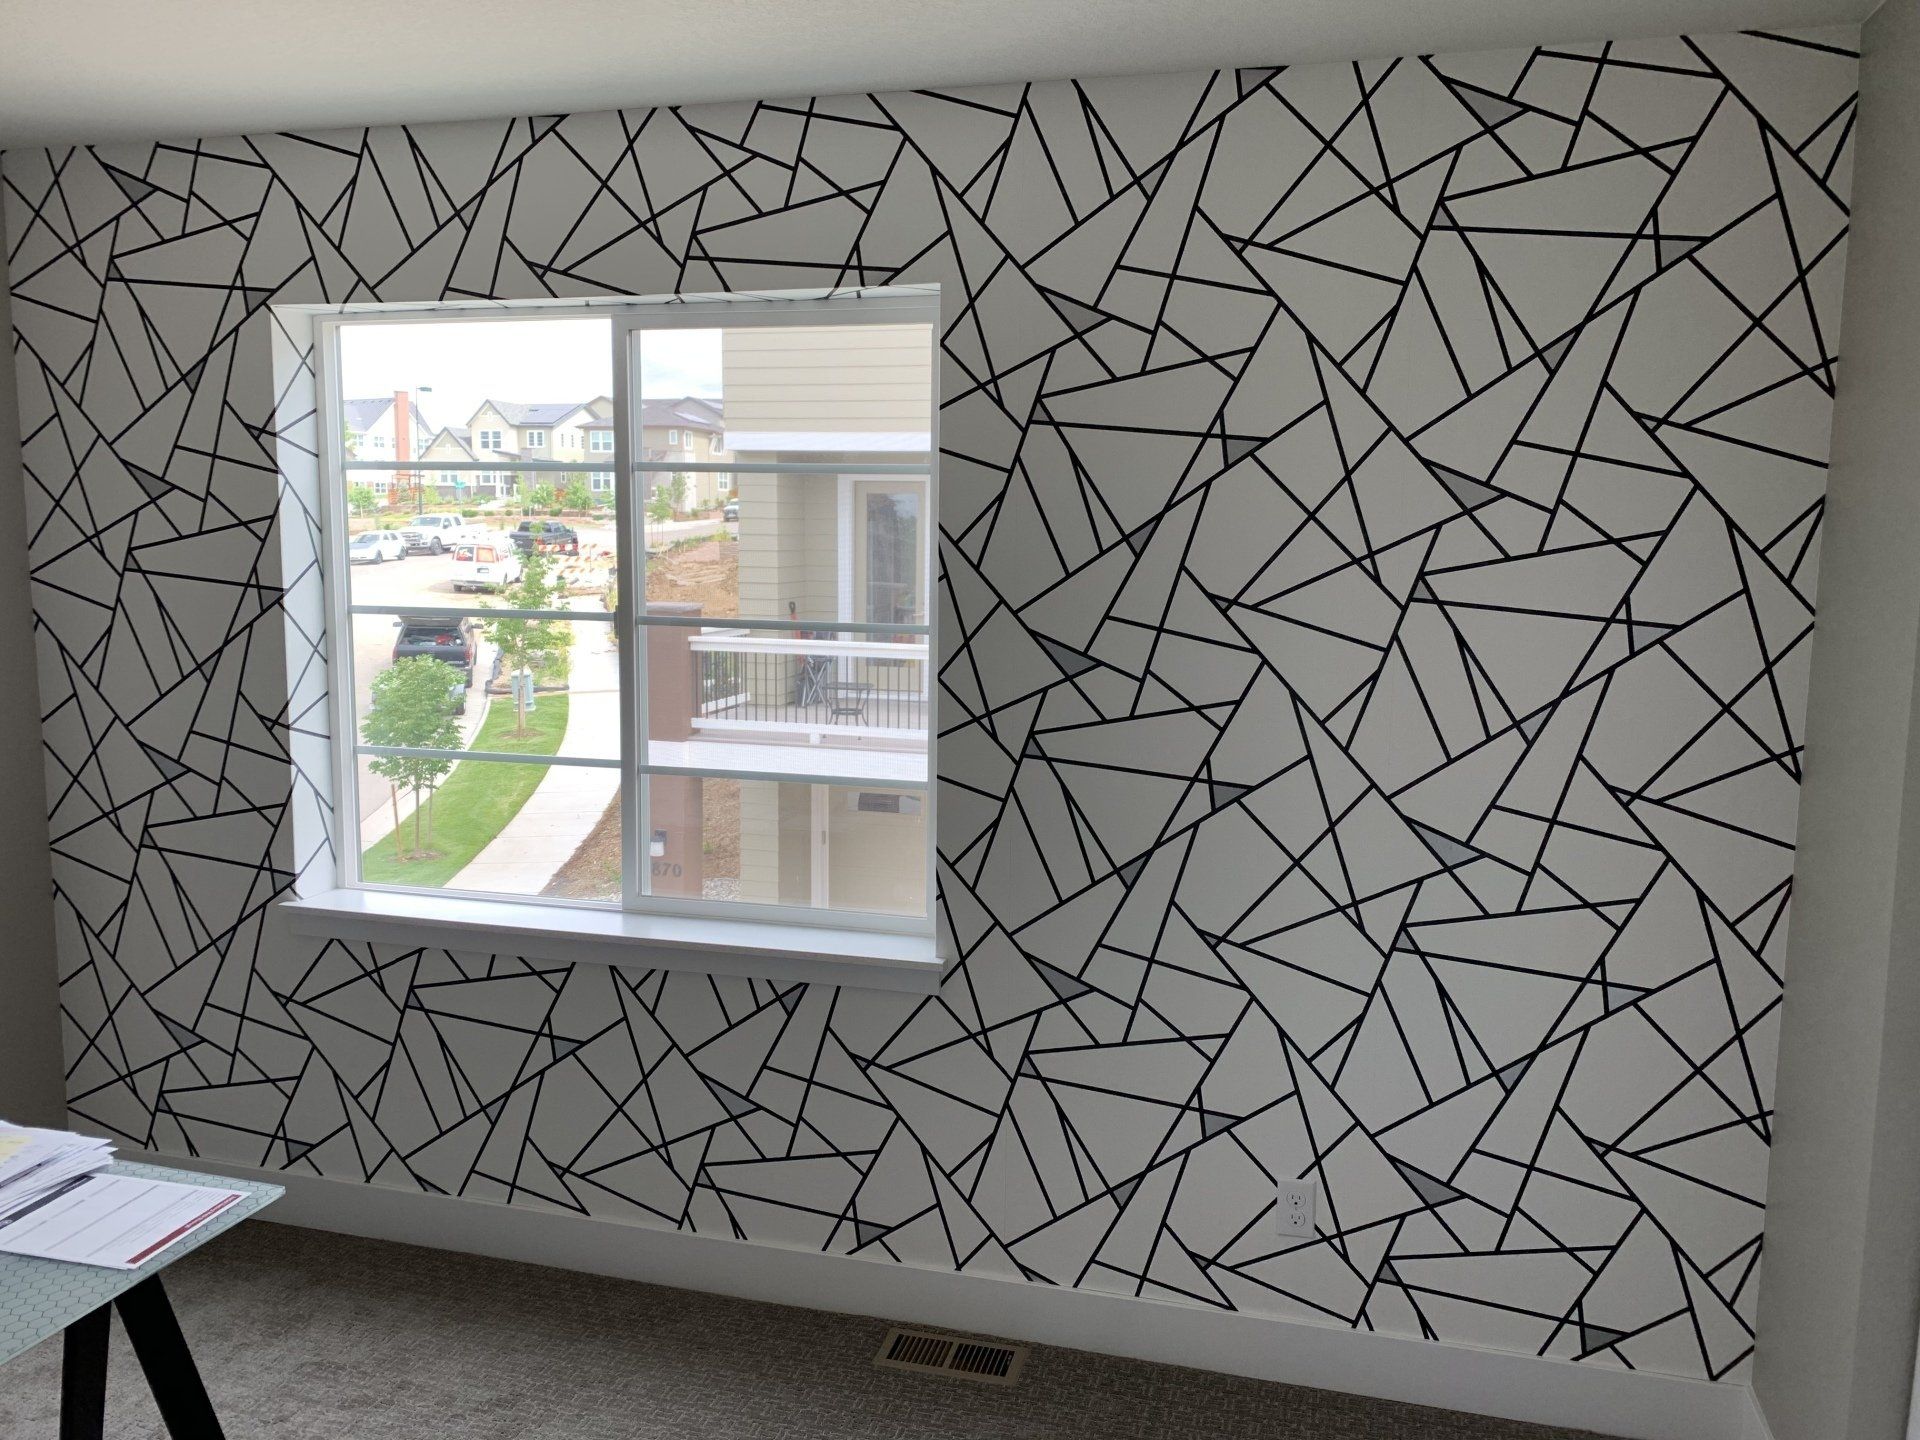 Geometric triangle patterned white, gray, and black wallpaper